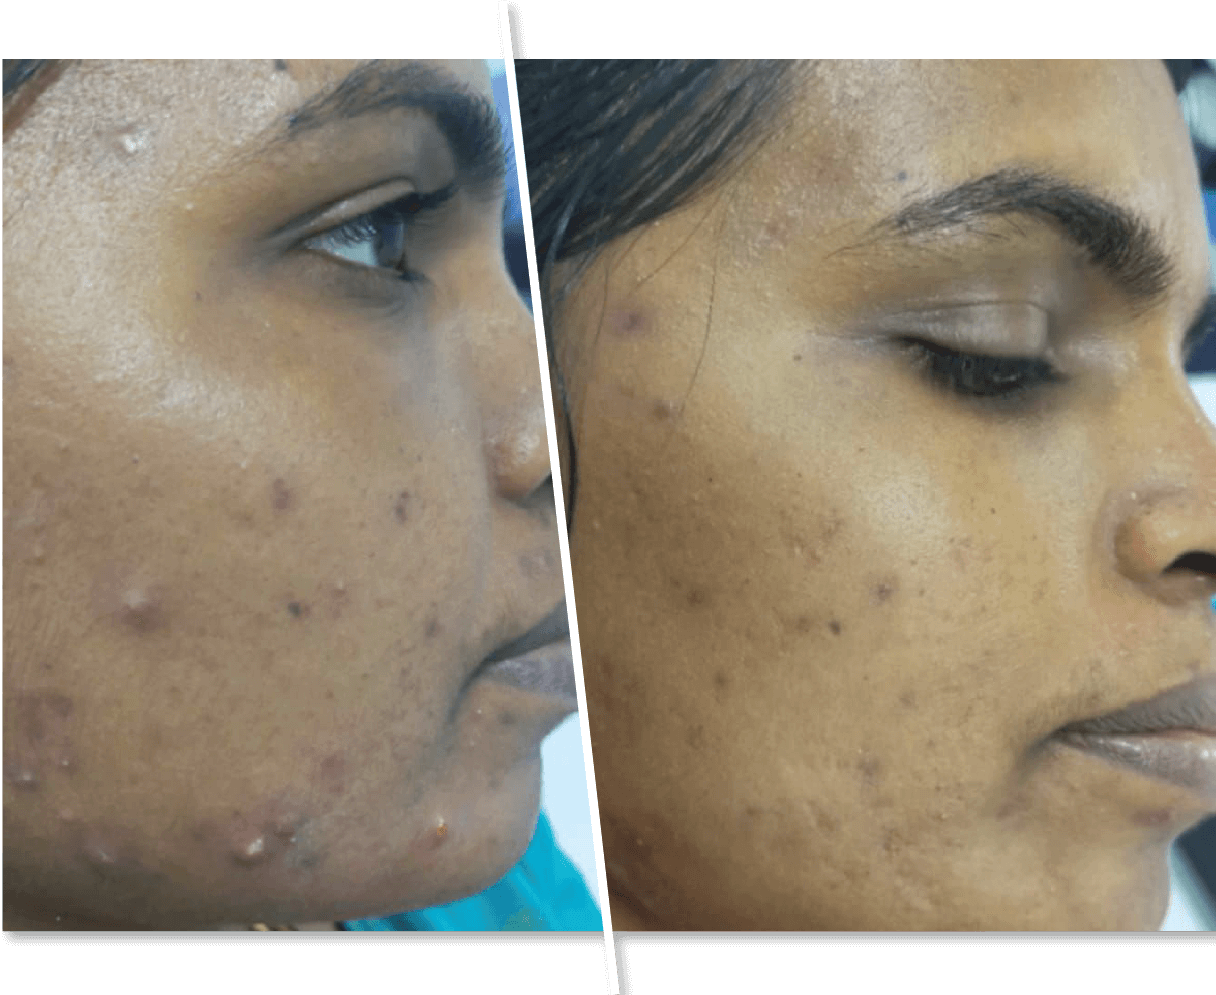 Acne and Pimples Before and After Treatment